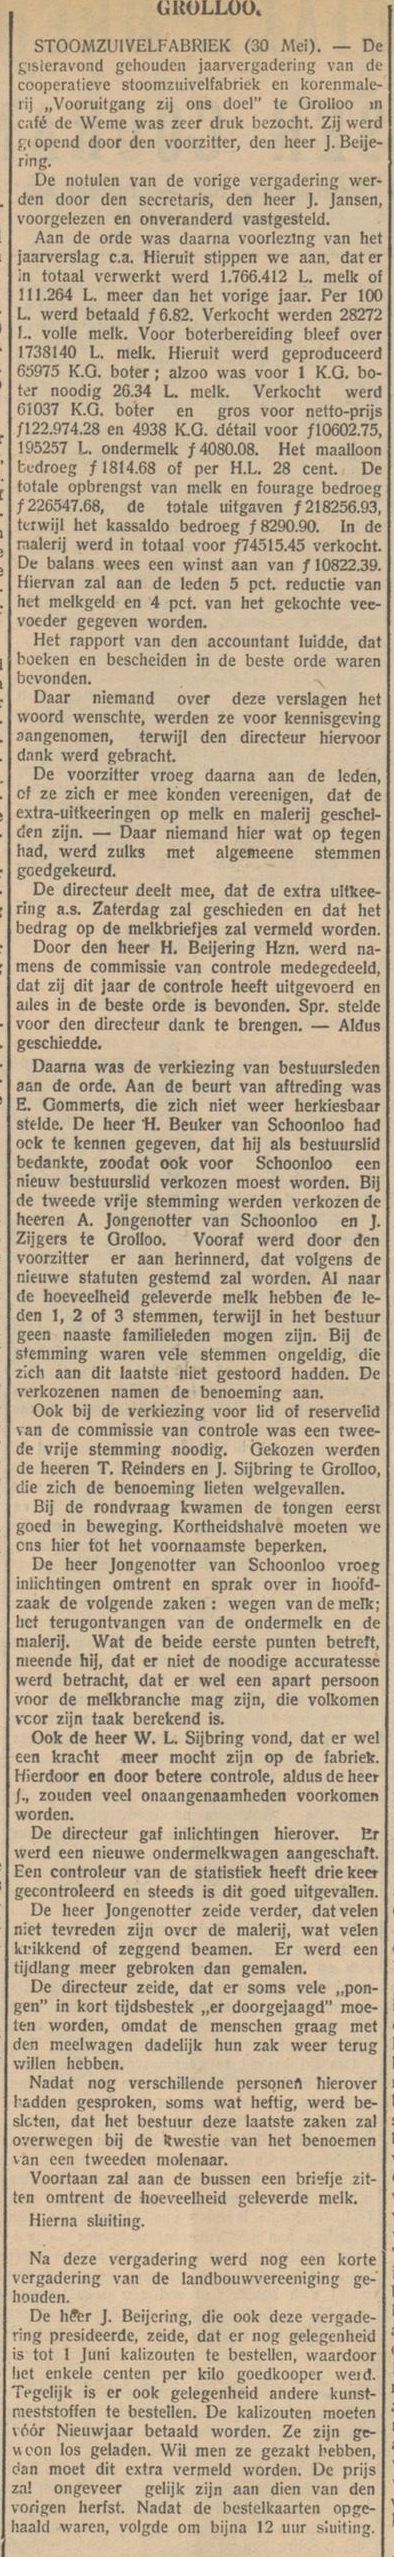 19290531 krant PDAC zuivel alv reinders controle comm